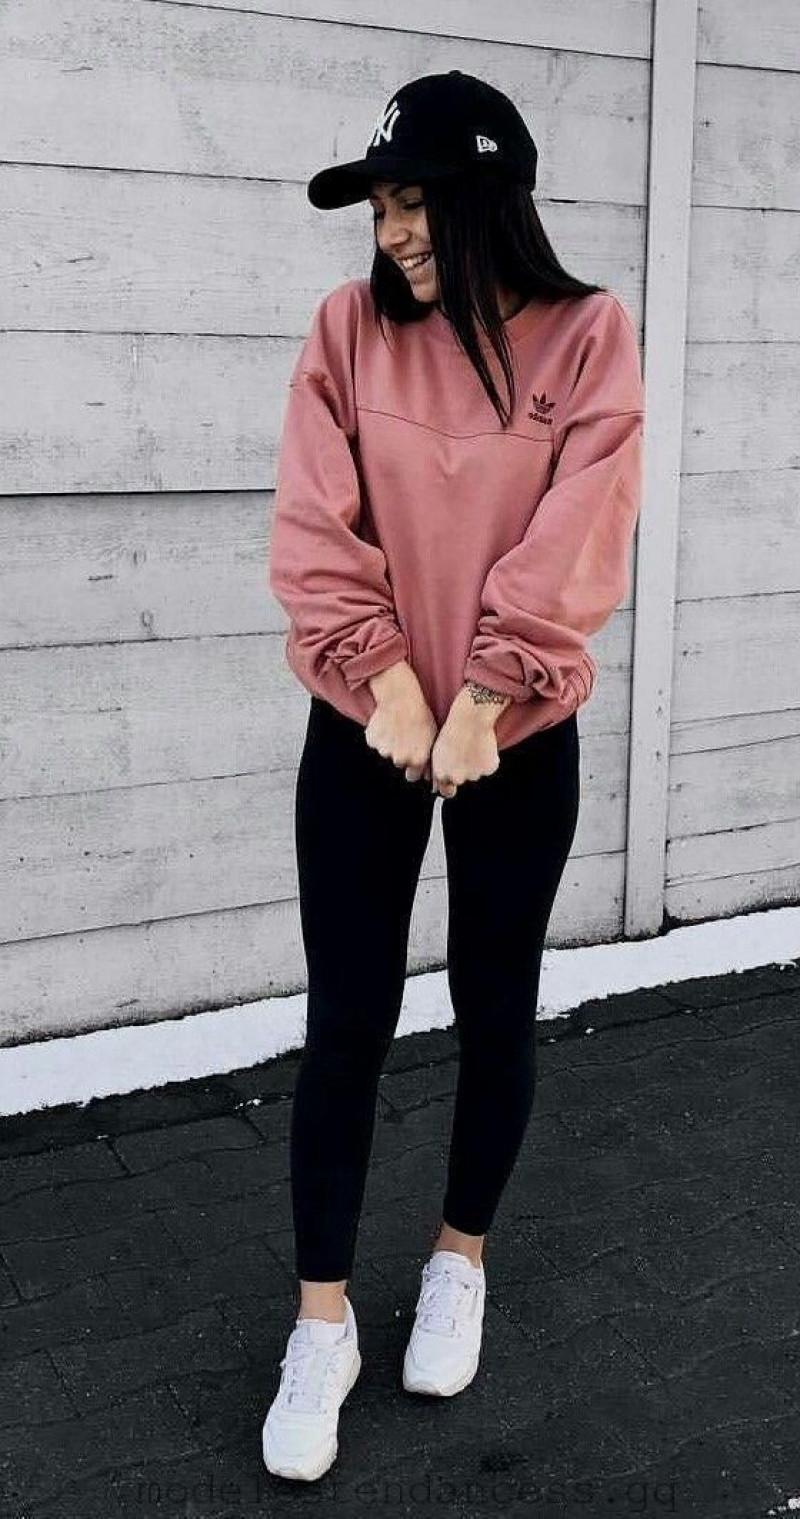 Pink Long Sleeves Cropped Blouse, Black Denim Sportswear Legging, Black Jeans And White Shoes Outfits